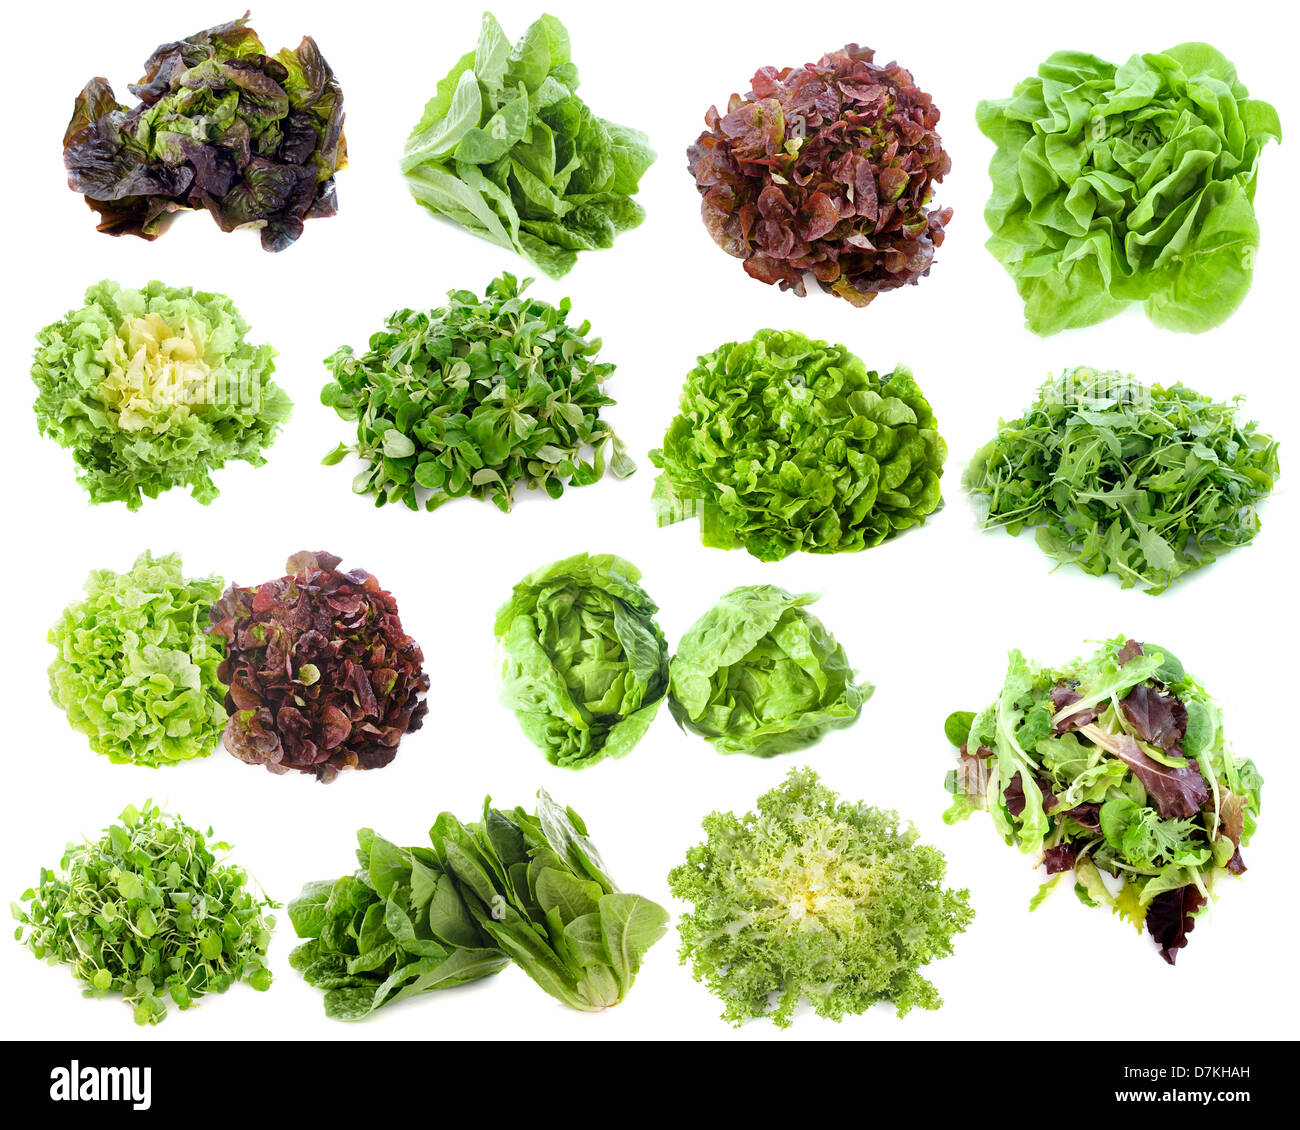 varieties of salads in front of white background Stock Photo